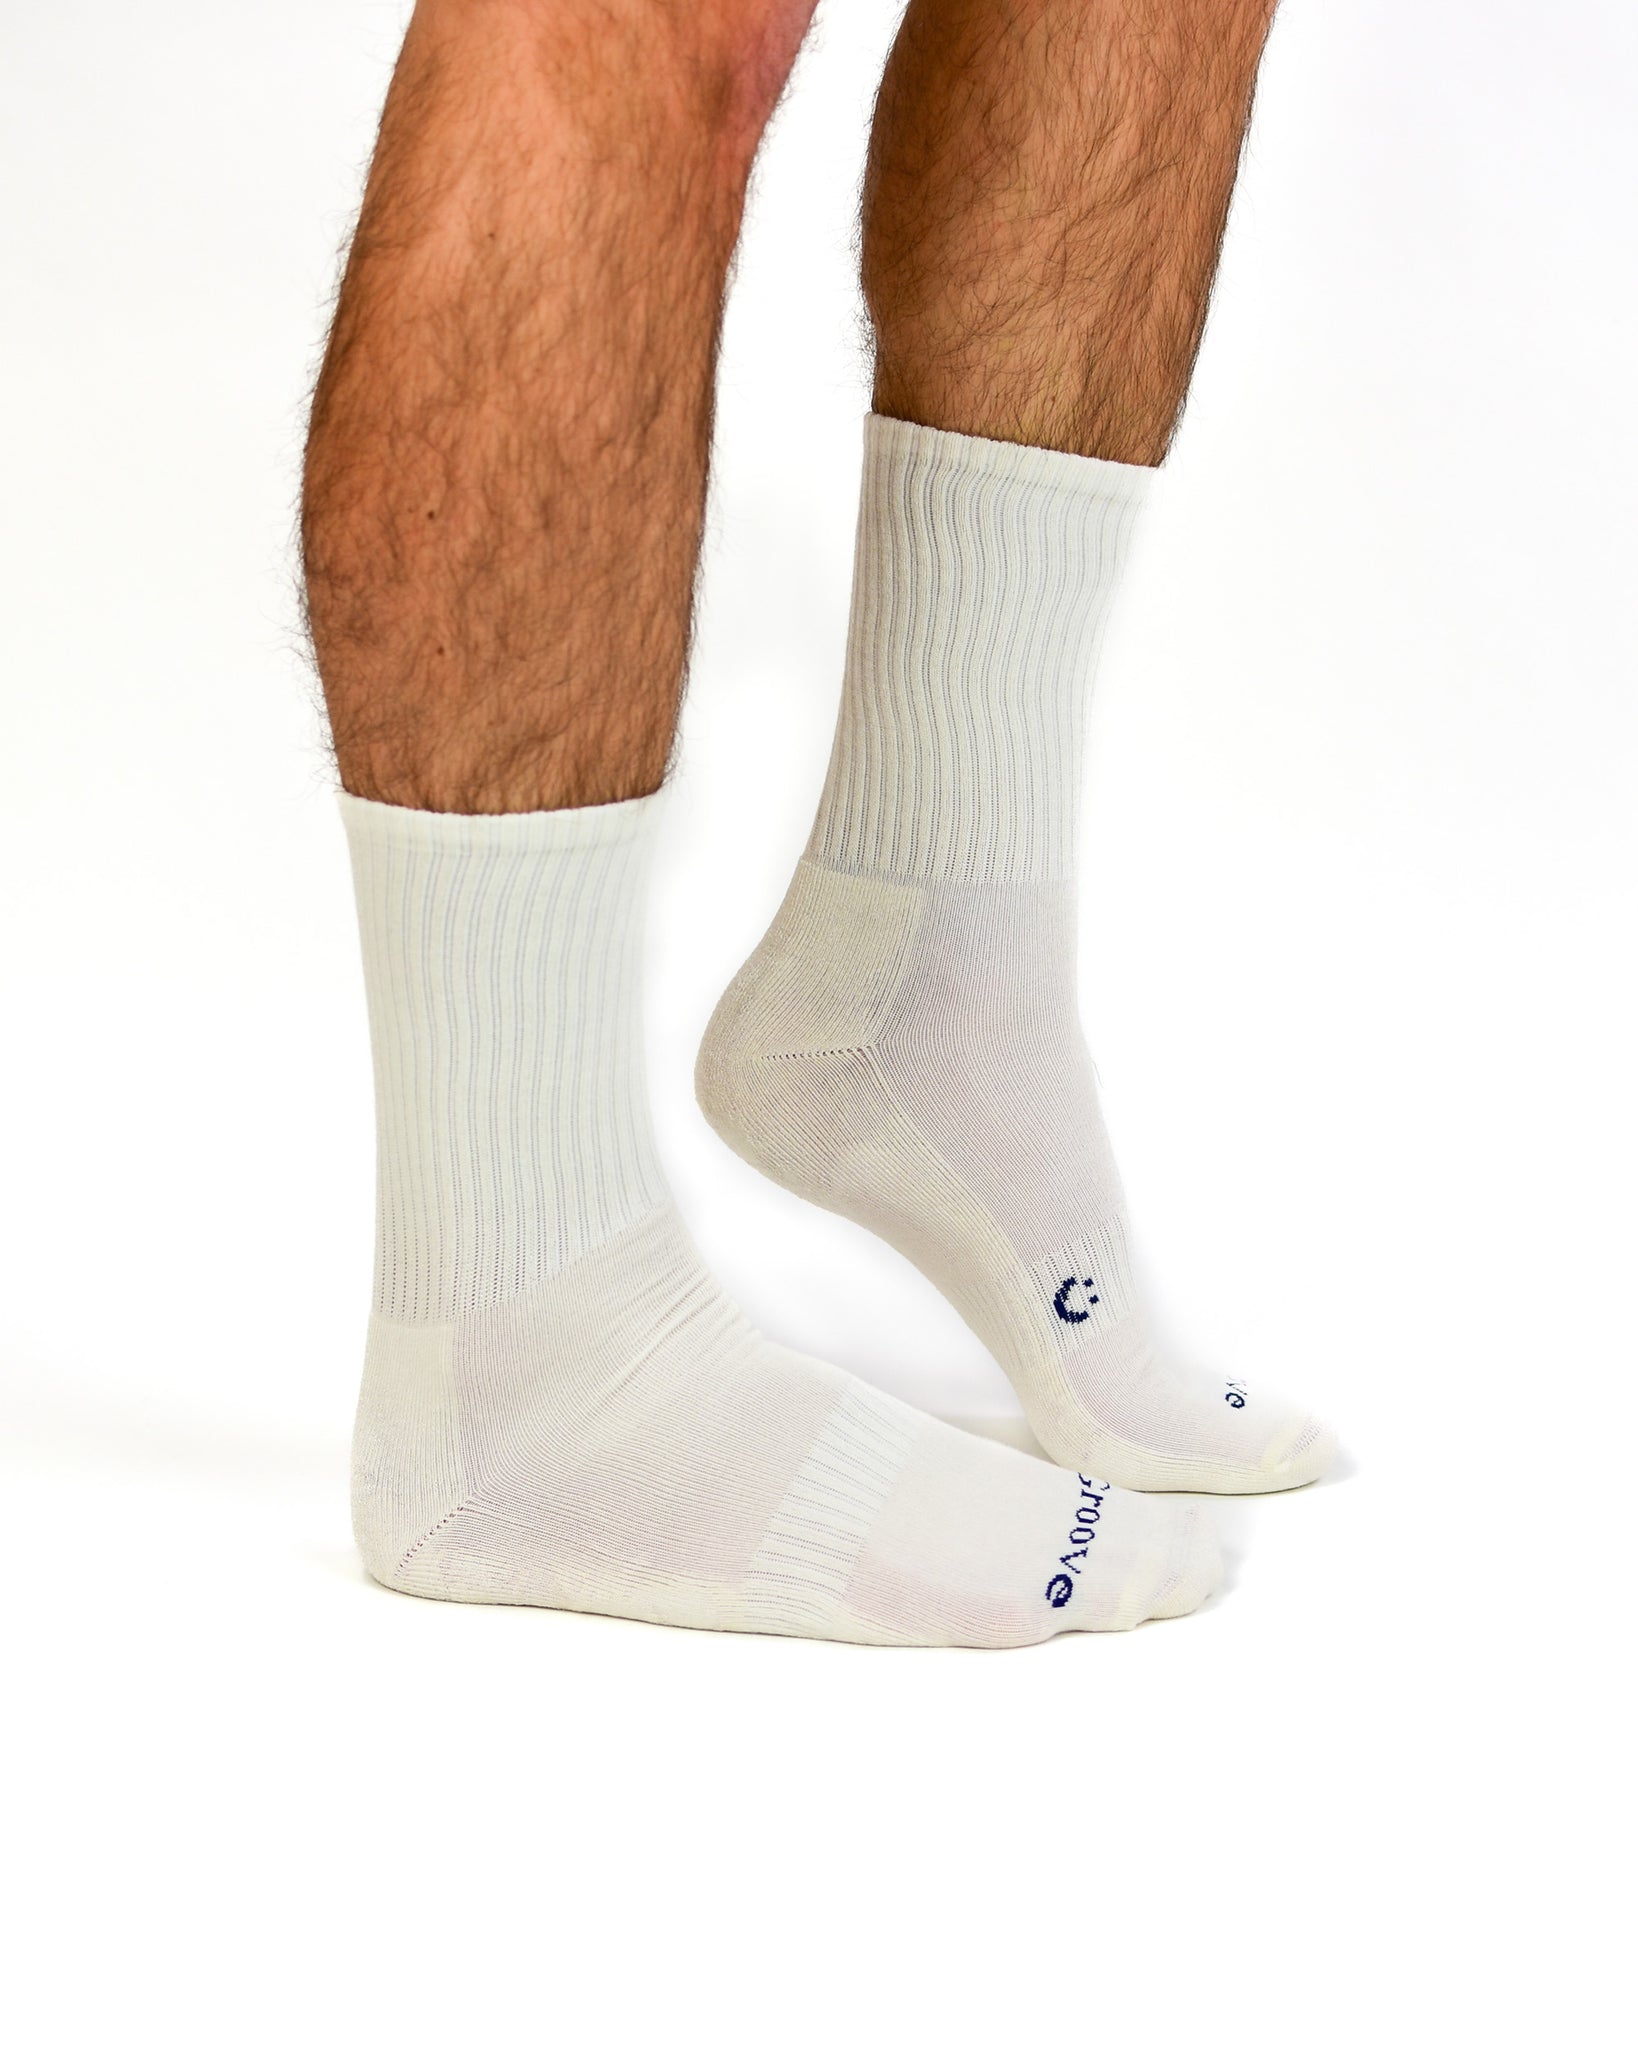 Active Crew Seamless Feel Sock 4 Pack (Adults) - Sunrise/Off White